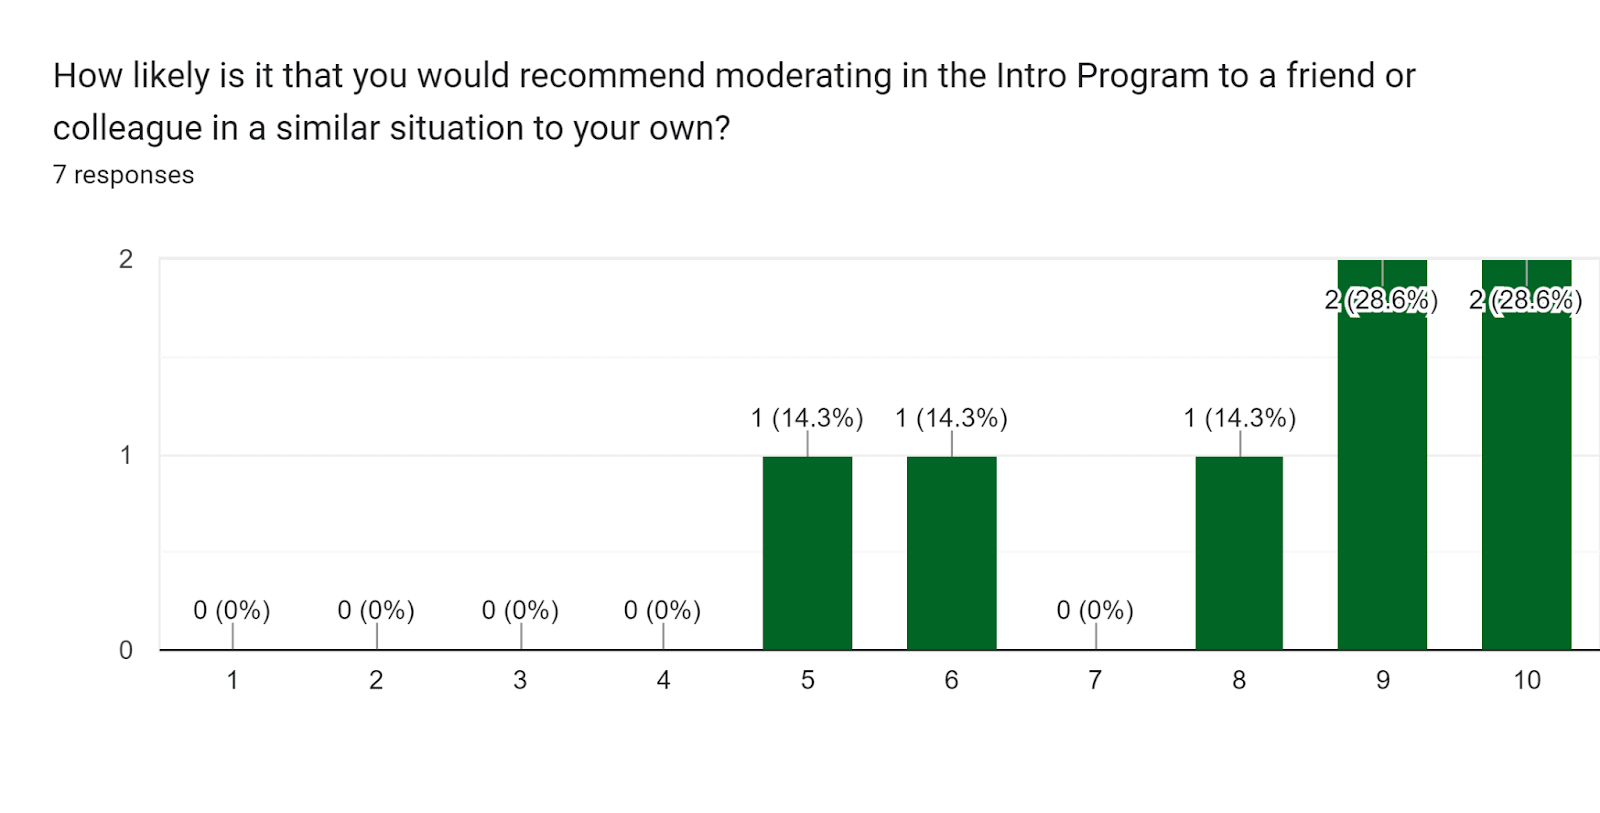 Forms response chart. Question title: How likely is it that you would recommend moderating in the Intro Program to a friend or colleague in a similar situation to your own?. Number of responses: 7 responses.